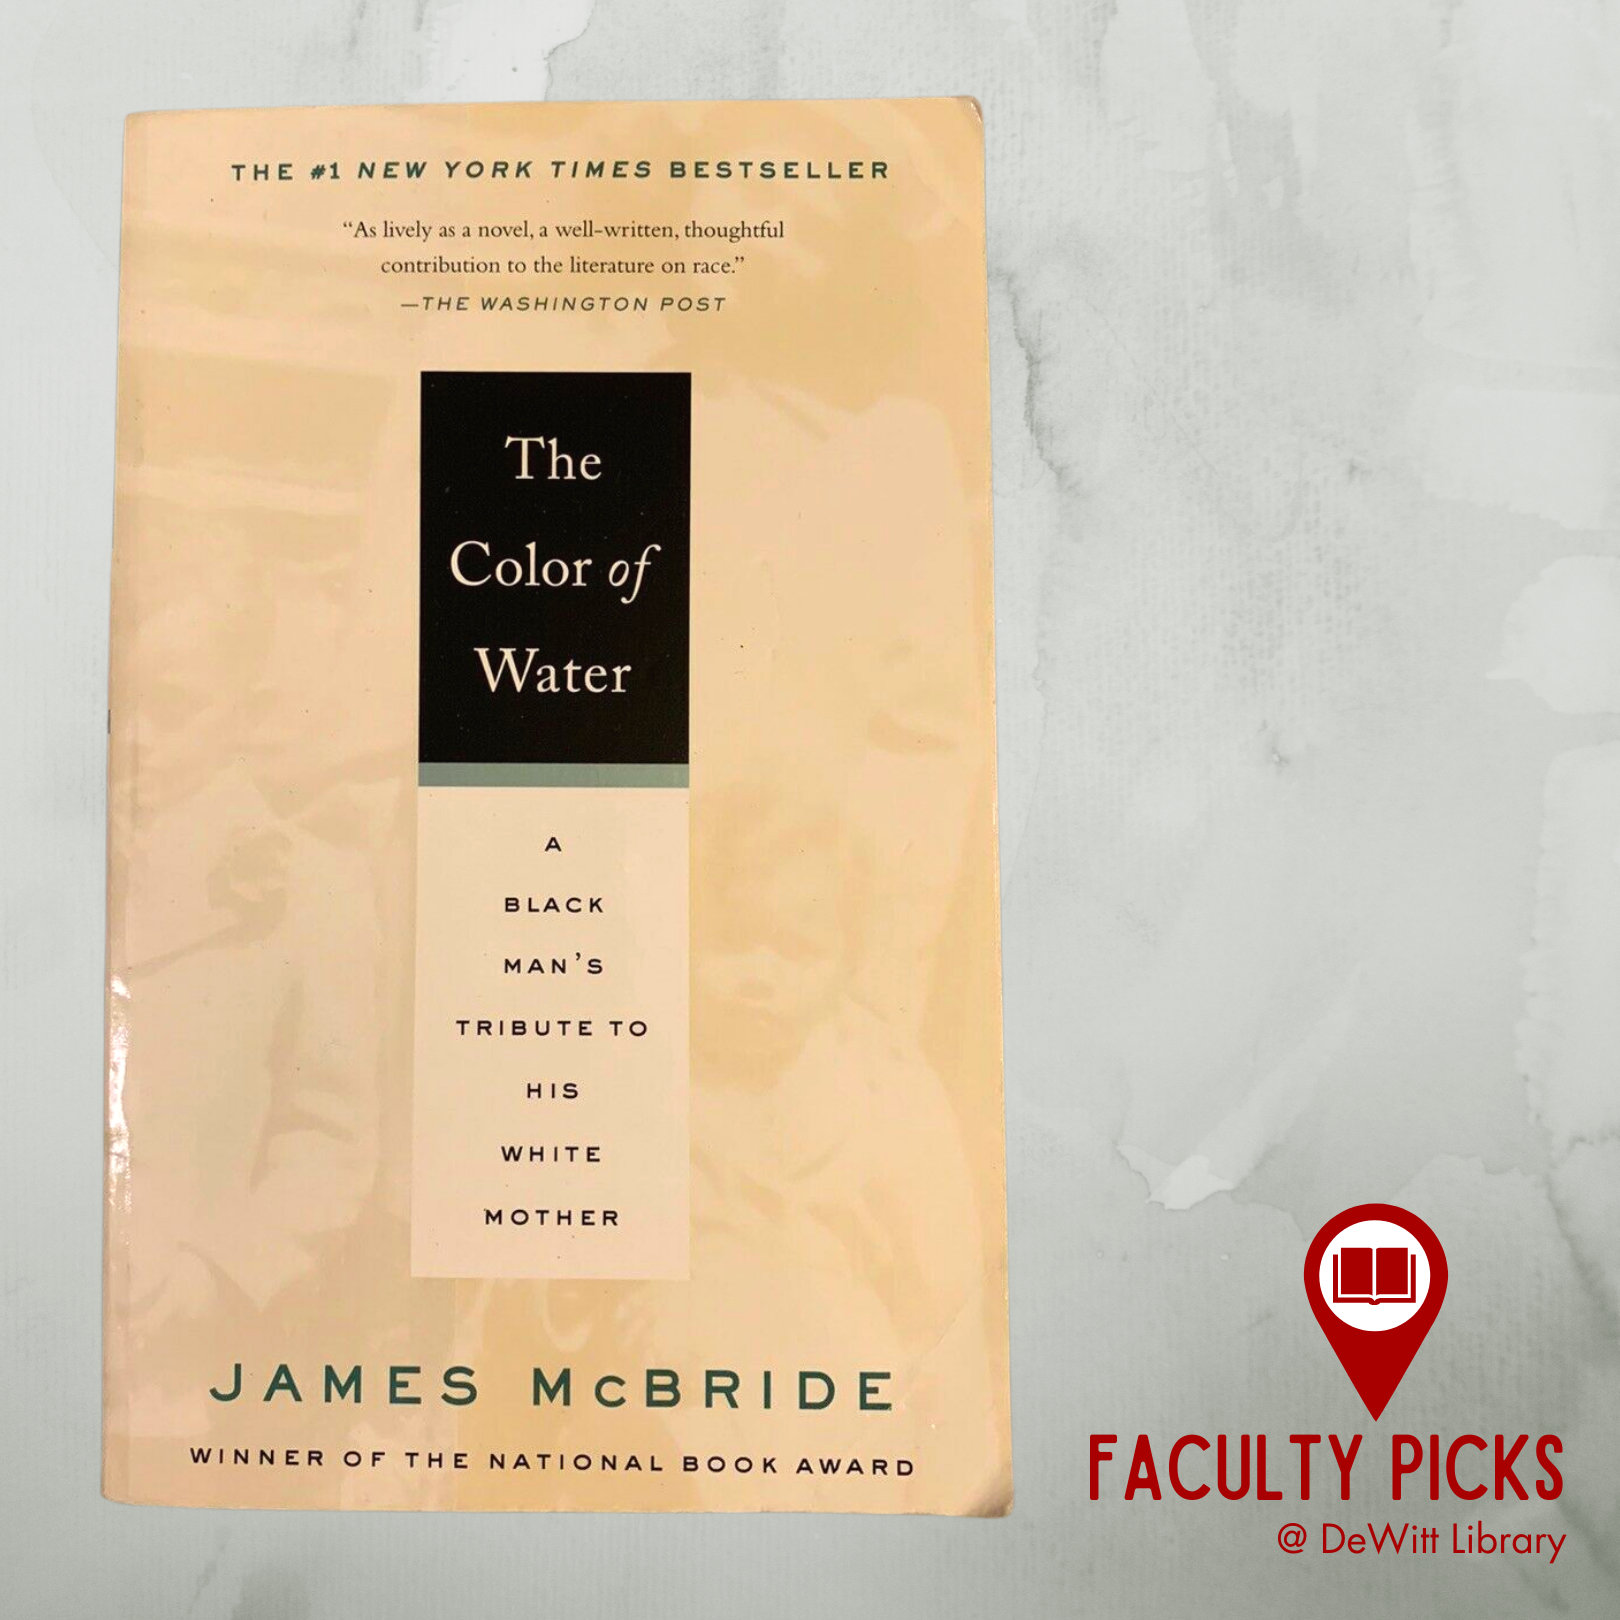 Faculty Picks - The Color of Water